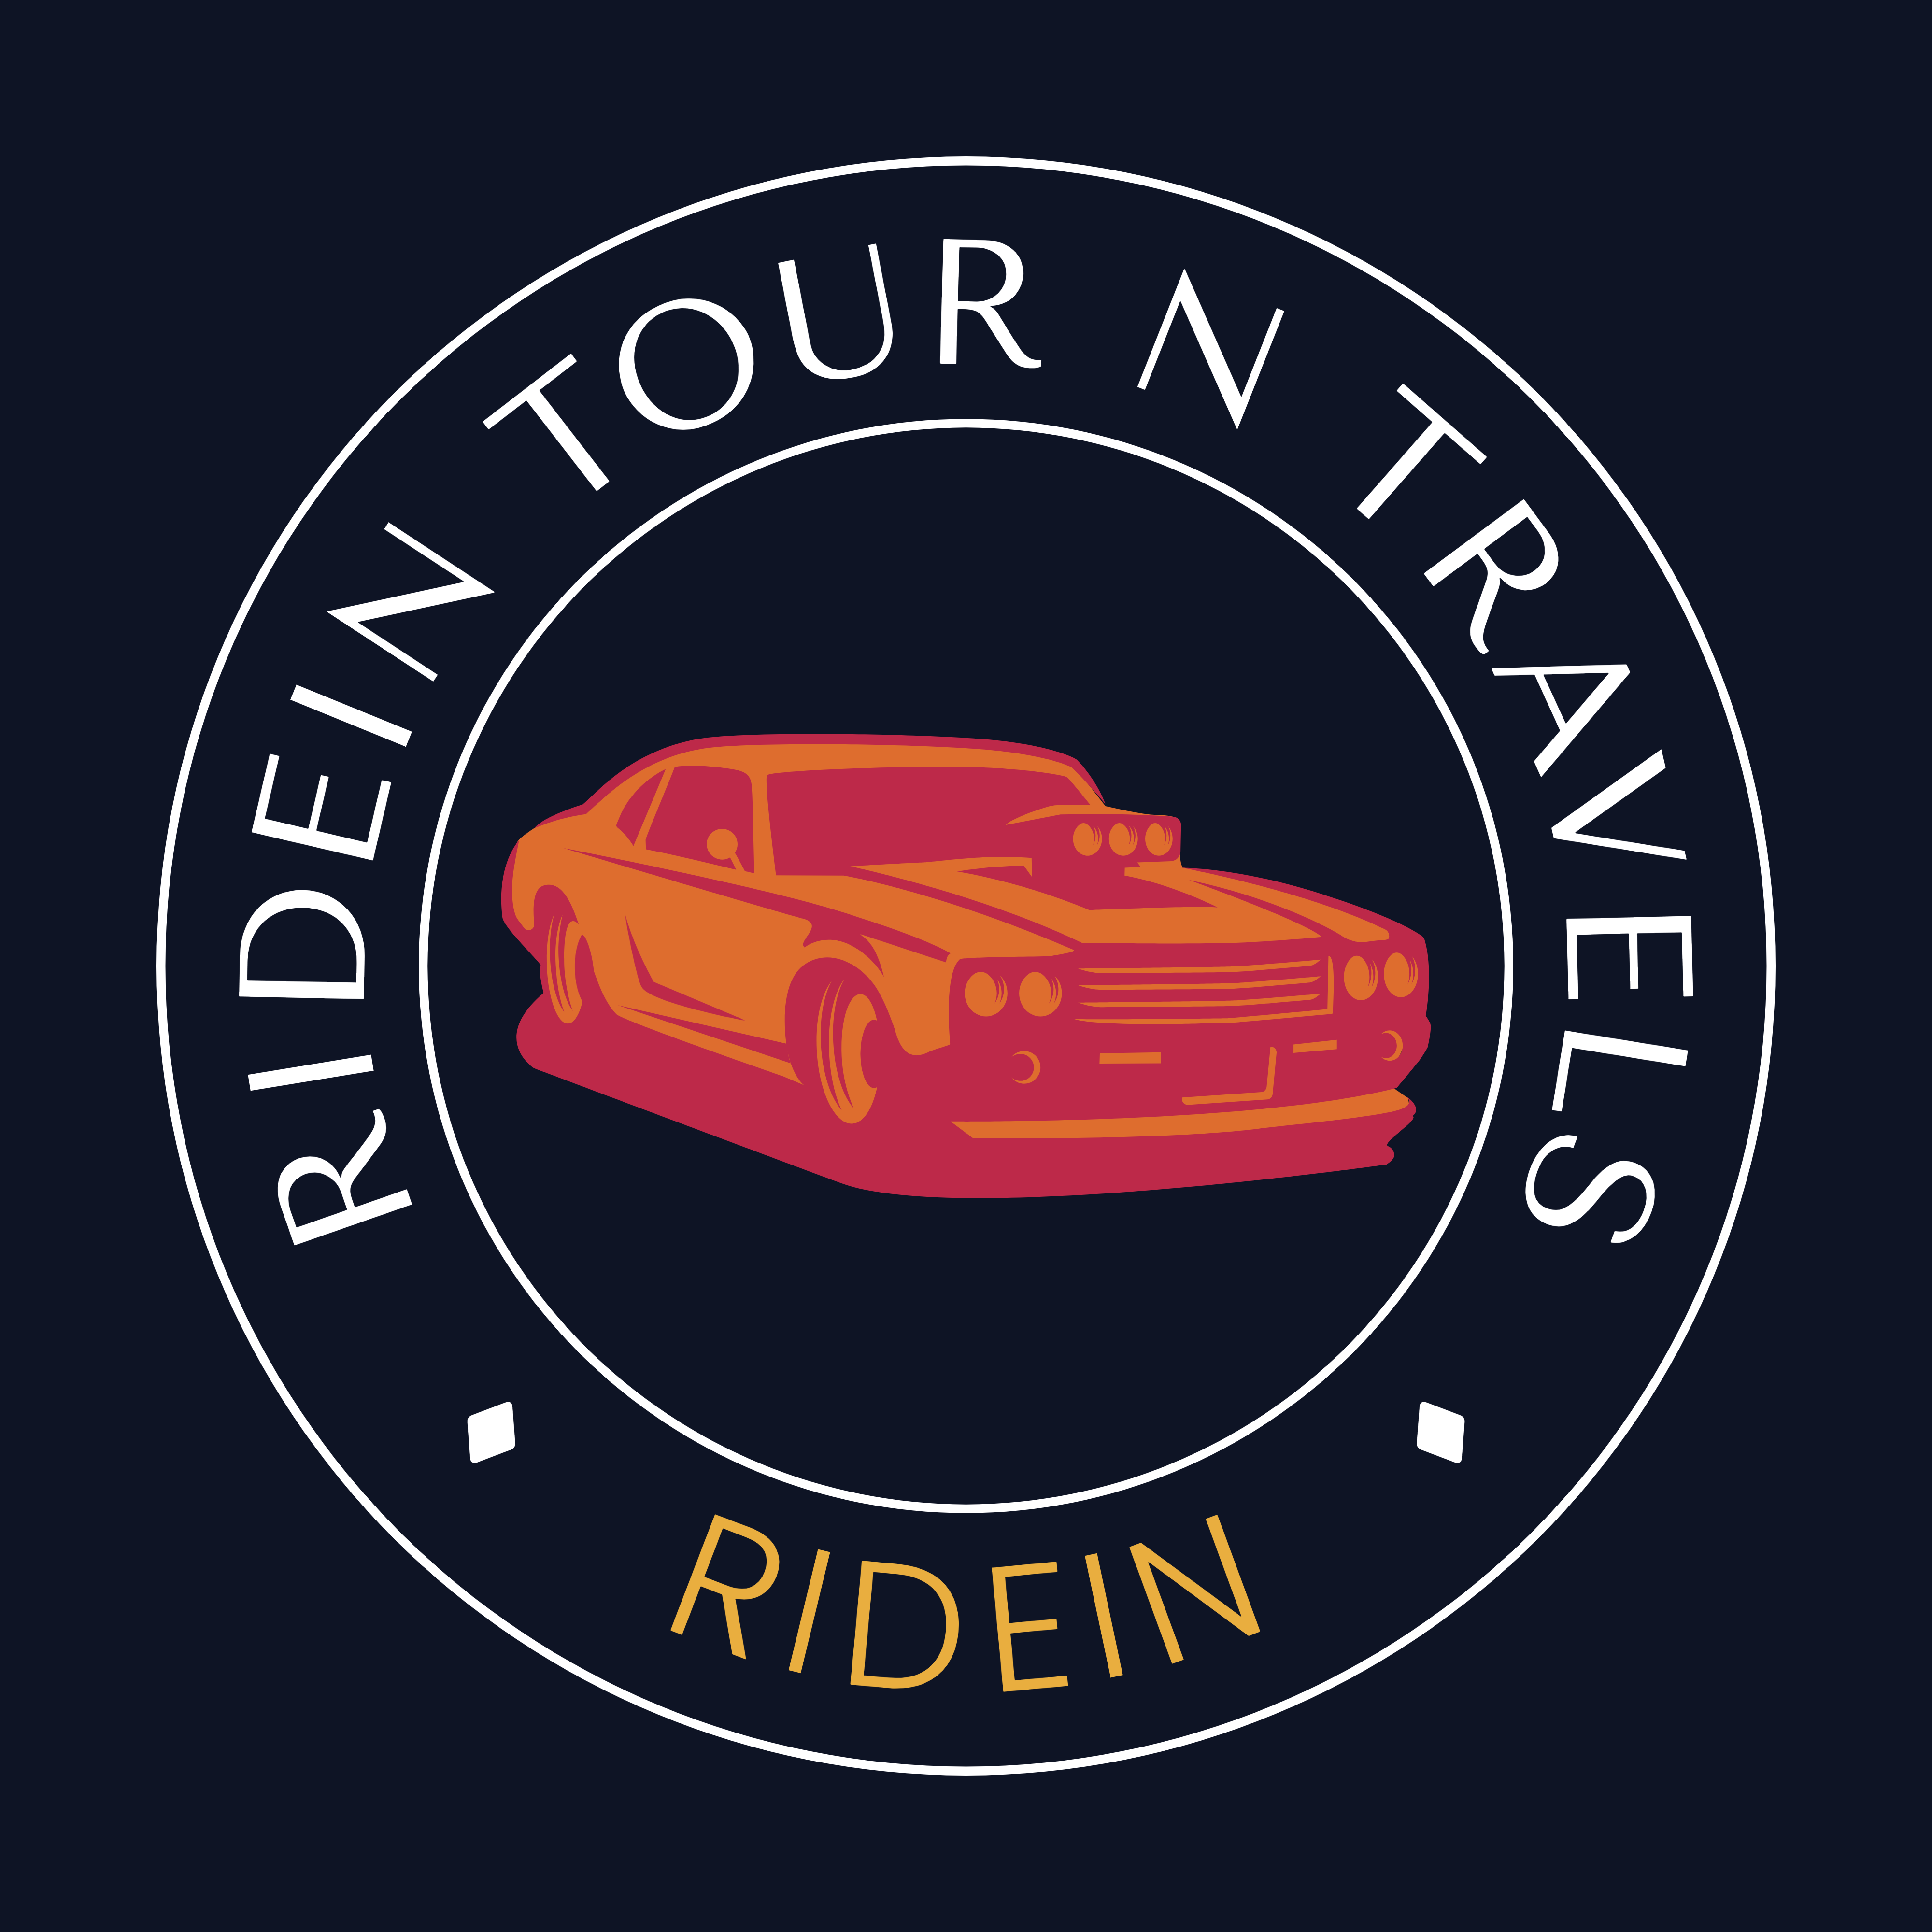 Ride in Tour N Travels